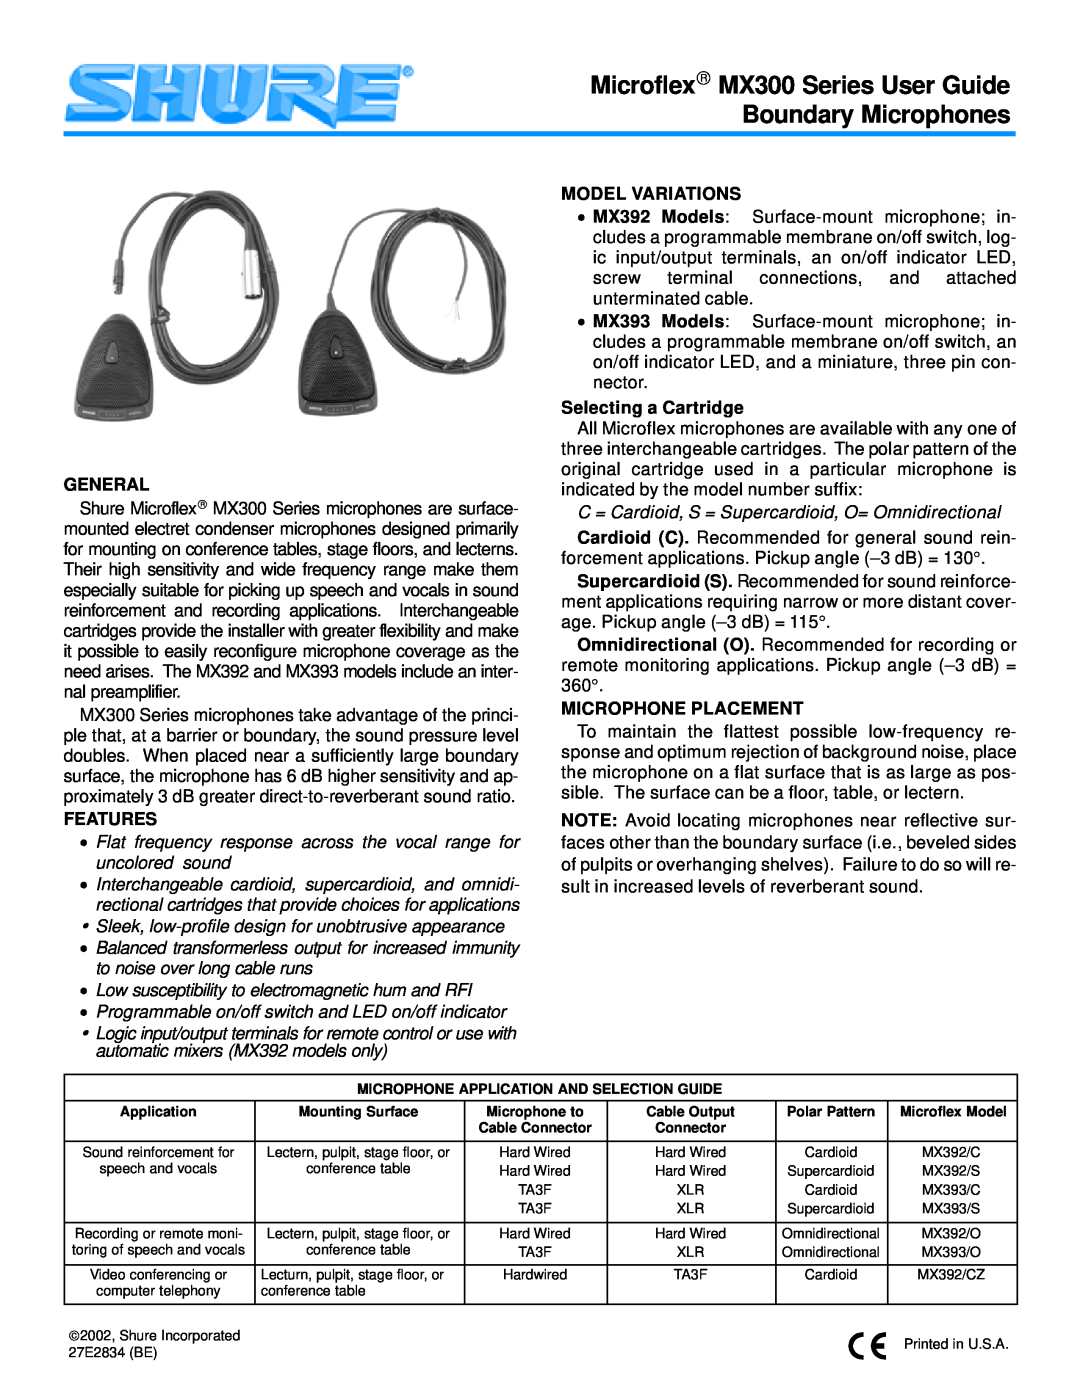 Shure MX392/S, MX300 manual General, Features, to noise over long cable runs, Model Variations, Selecting a Cartridge 